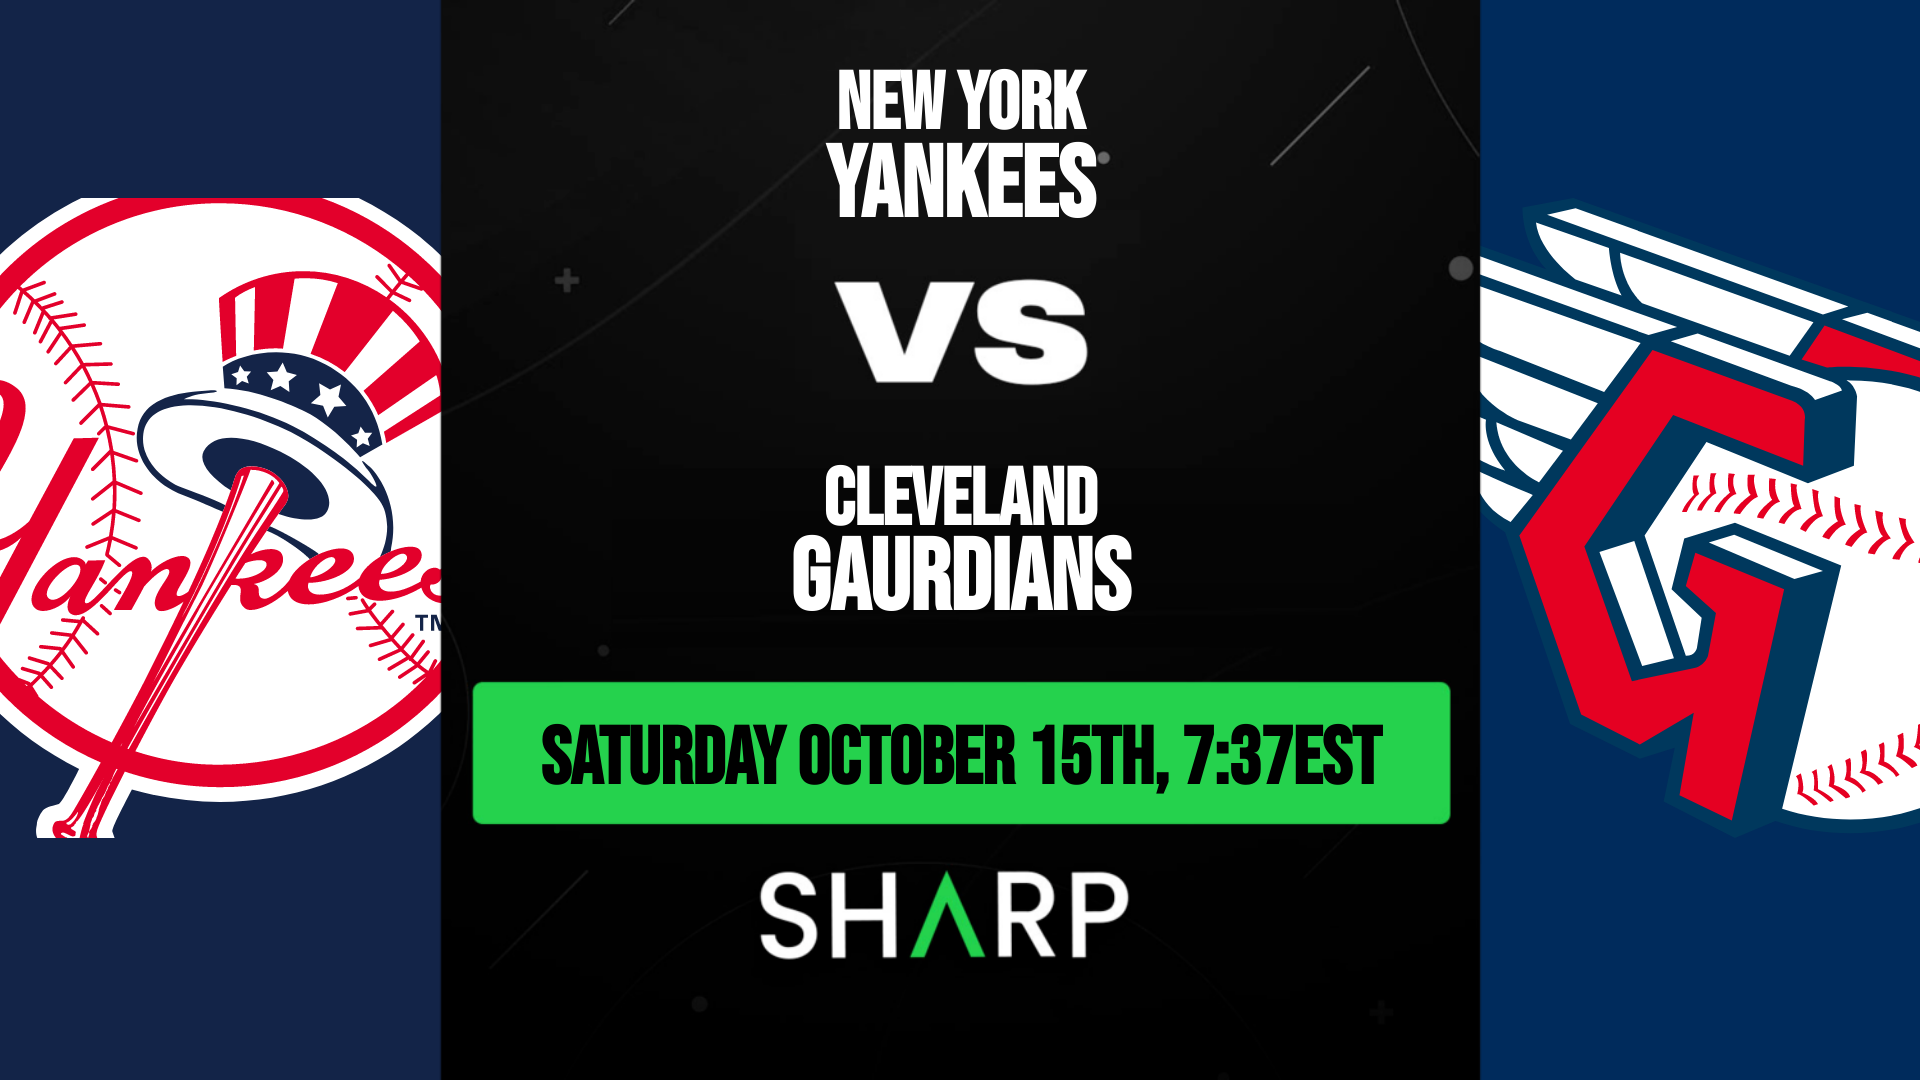 nyy-vs-cle-october-15-2022-6497c